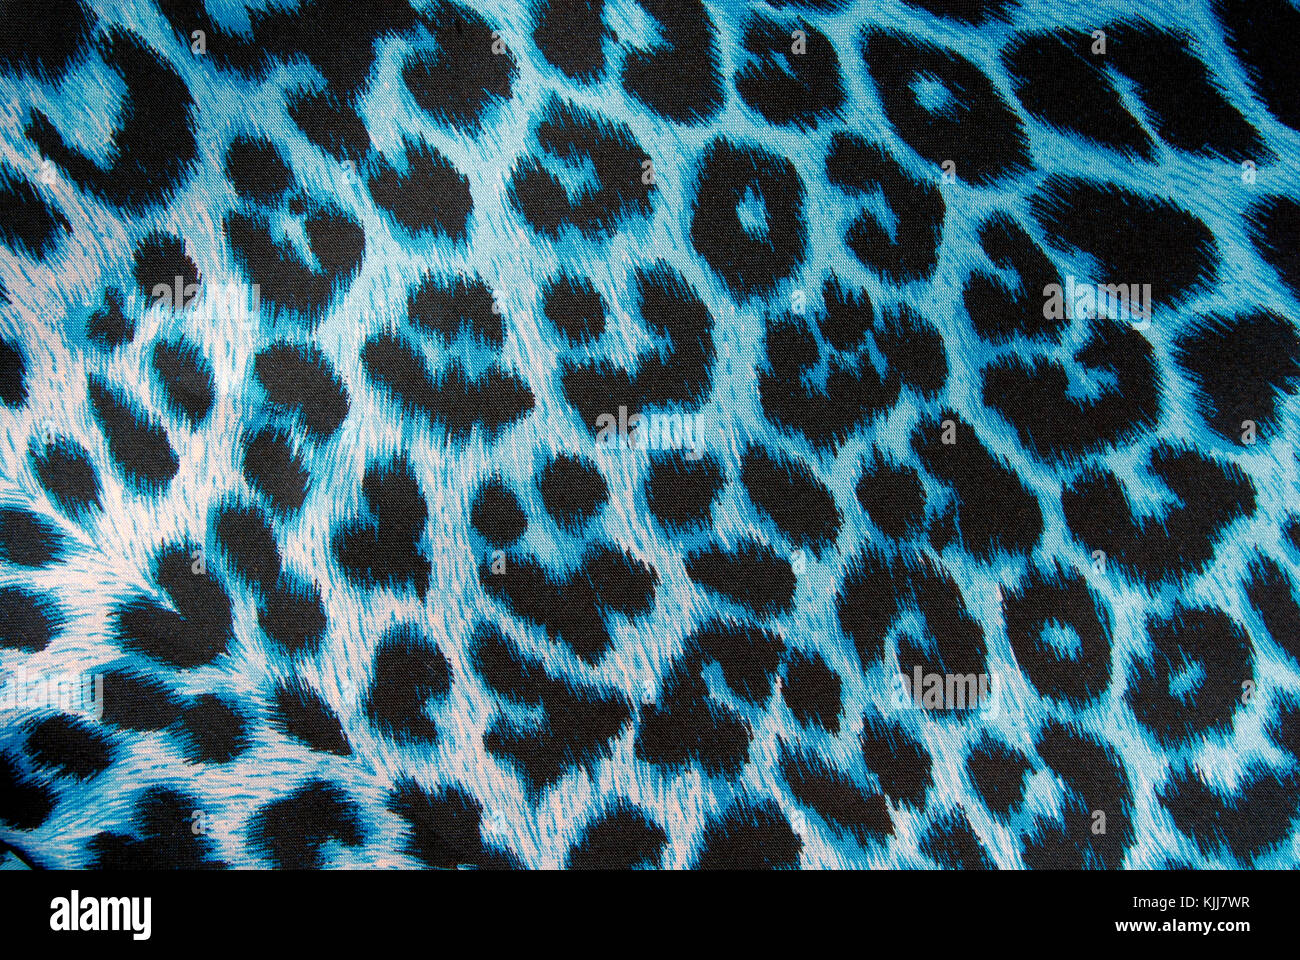 Tiger Print Fabric Close Up Background. Stock Photo, Picture and